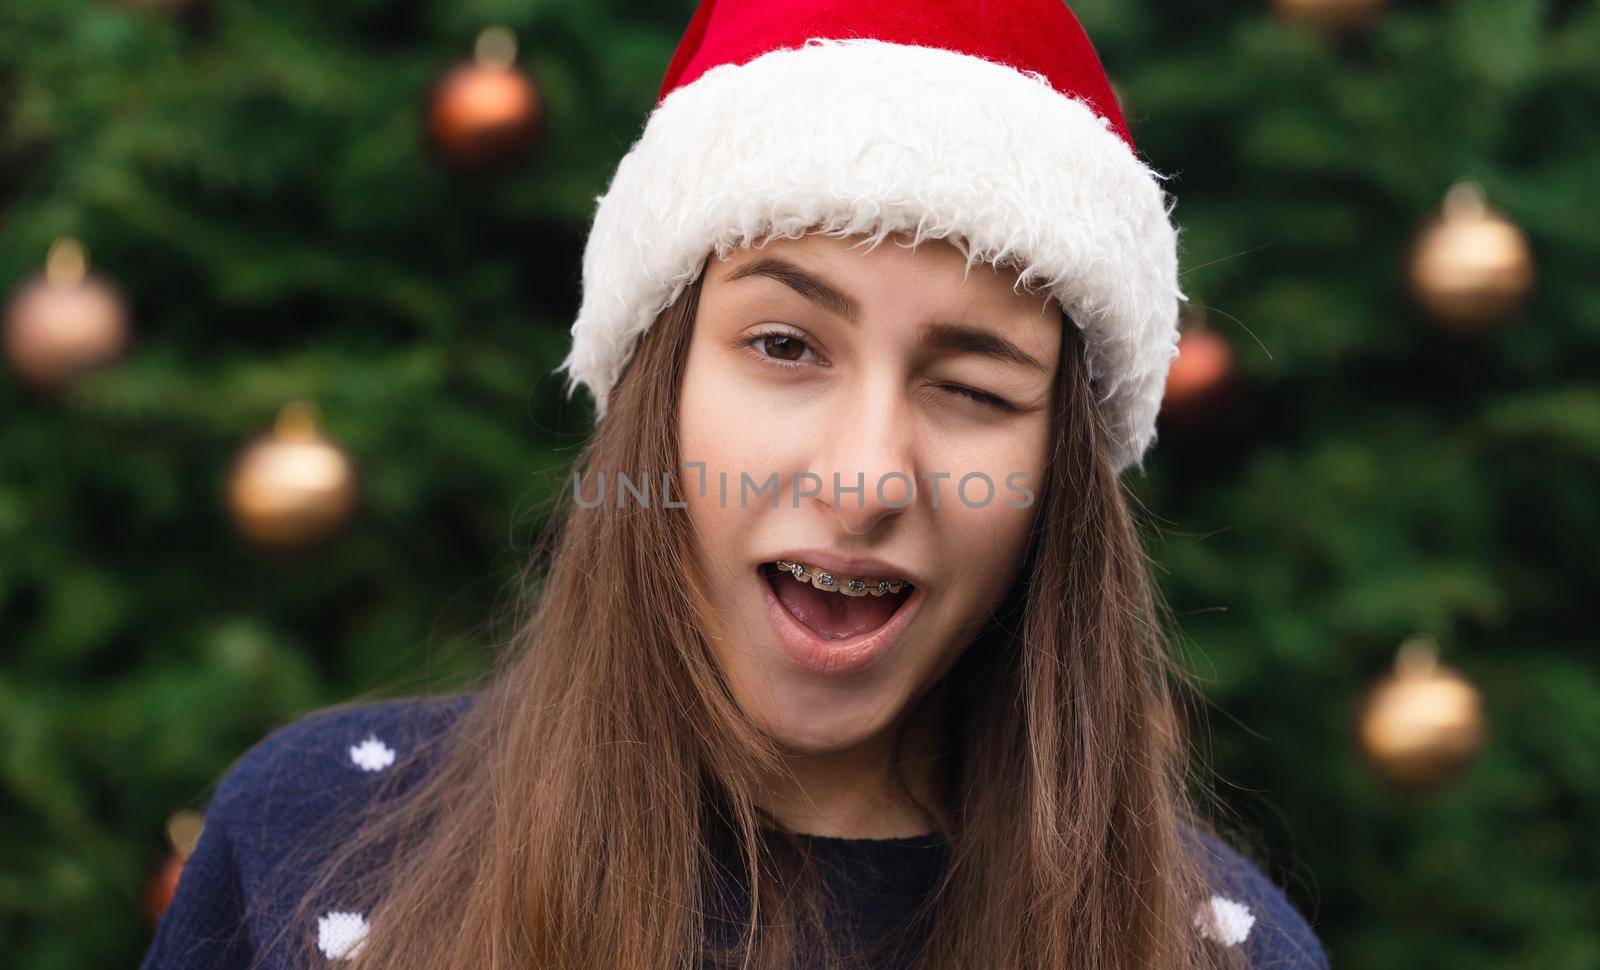 Everything will be fine for christmas. Close up Portrait of woman wearing a santa claus hat with emotion. Against the background of a Christmas tree.